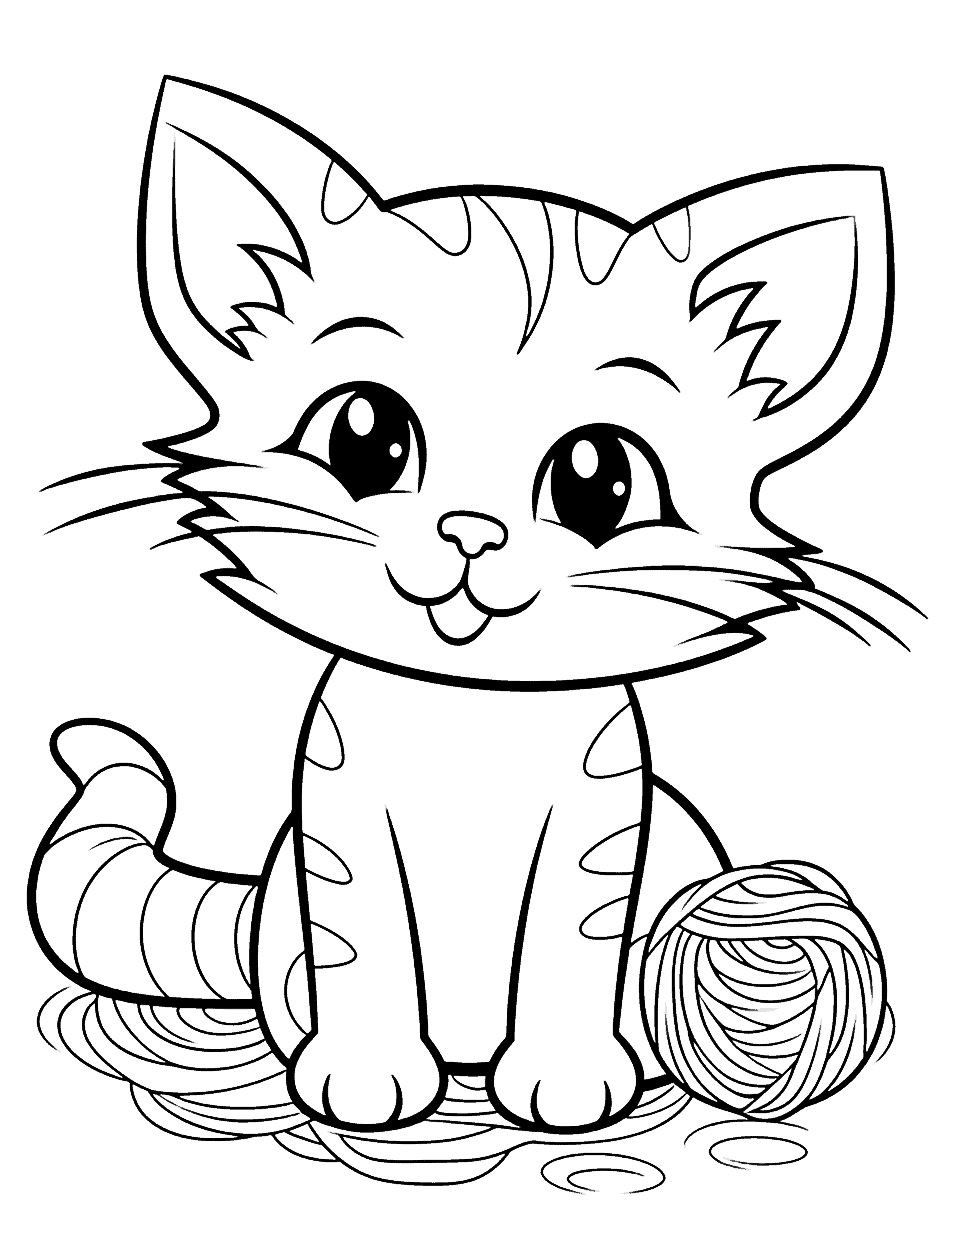 Playful Kitten in Yarn Animal Coloring Page - A cute kitten tangled up in colorful yarn, looking mischievous.